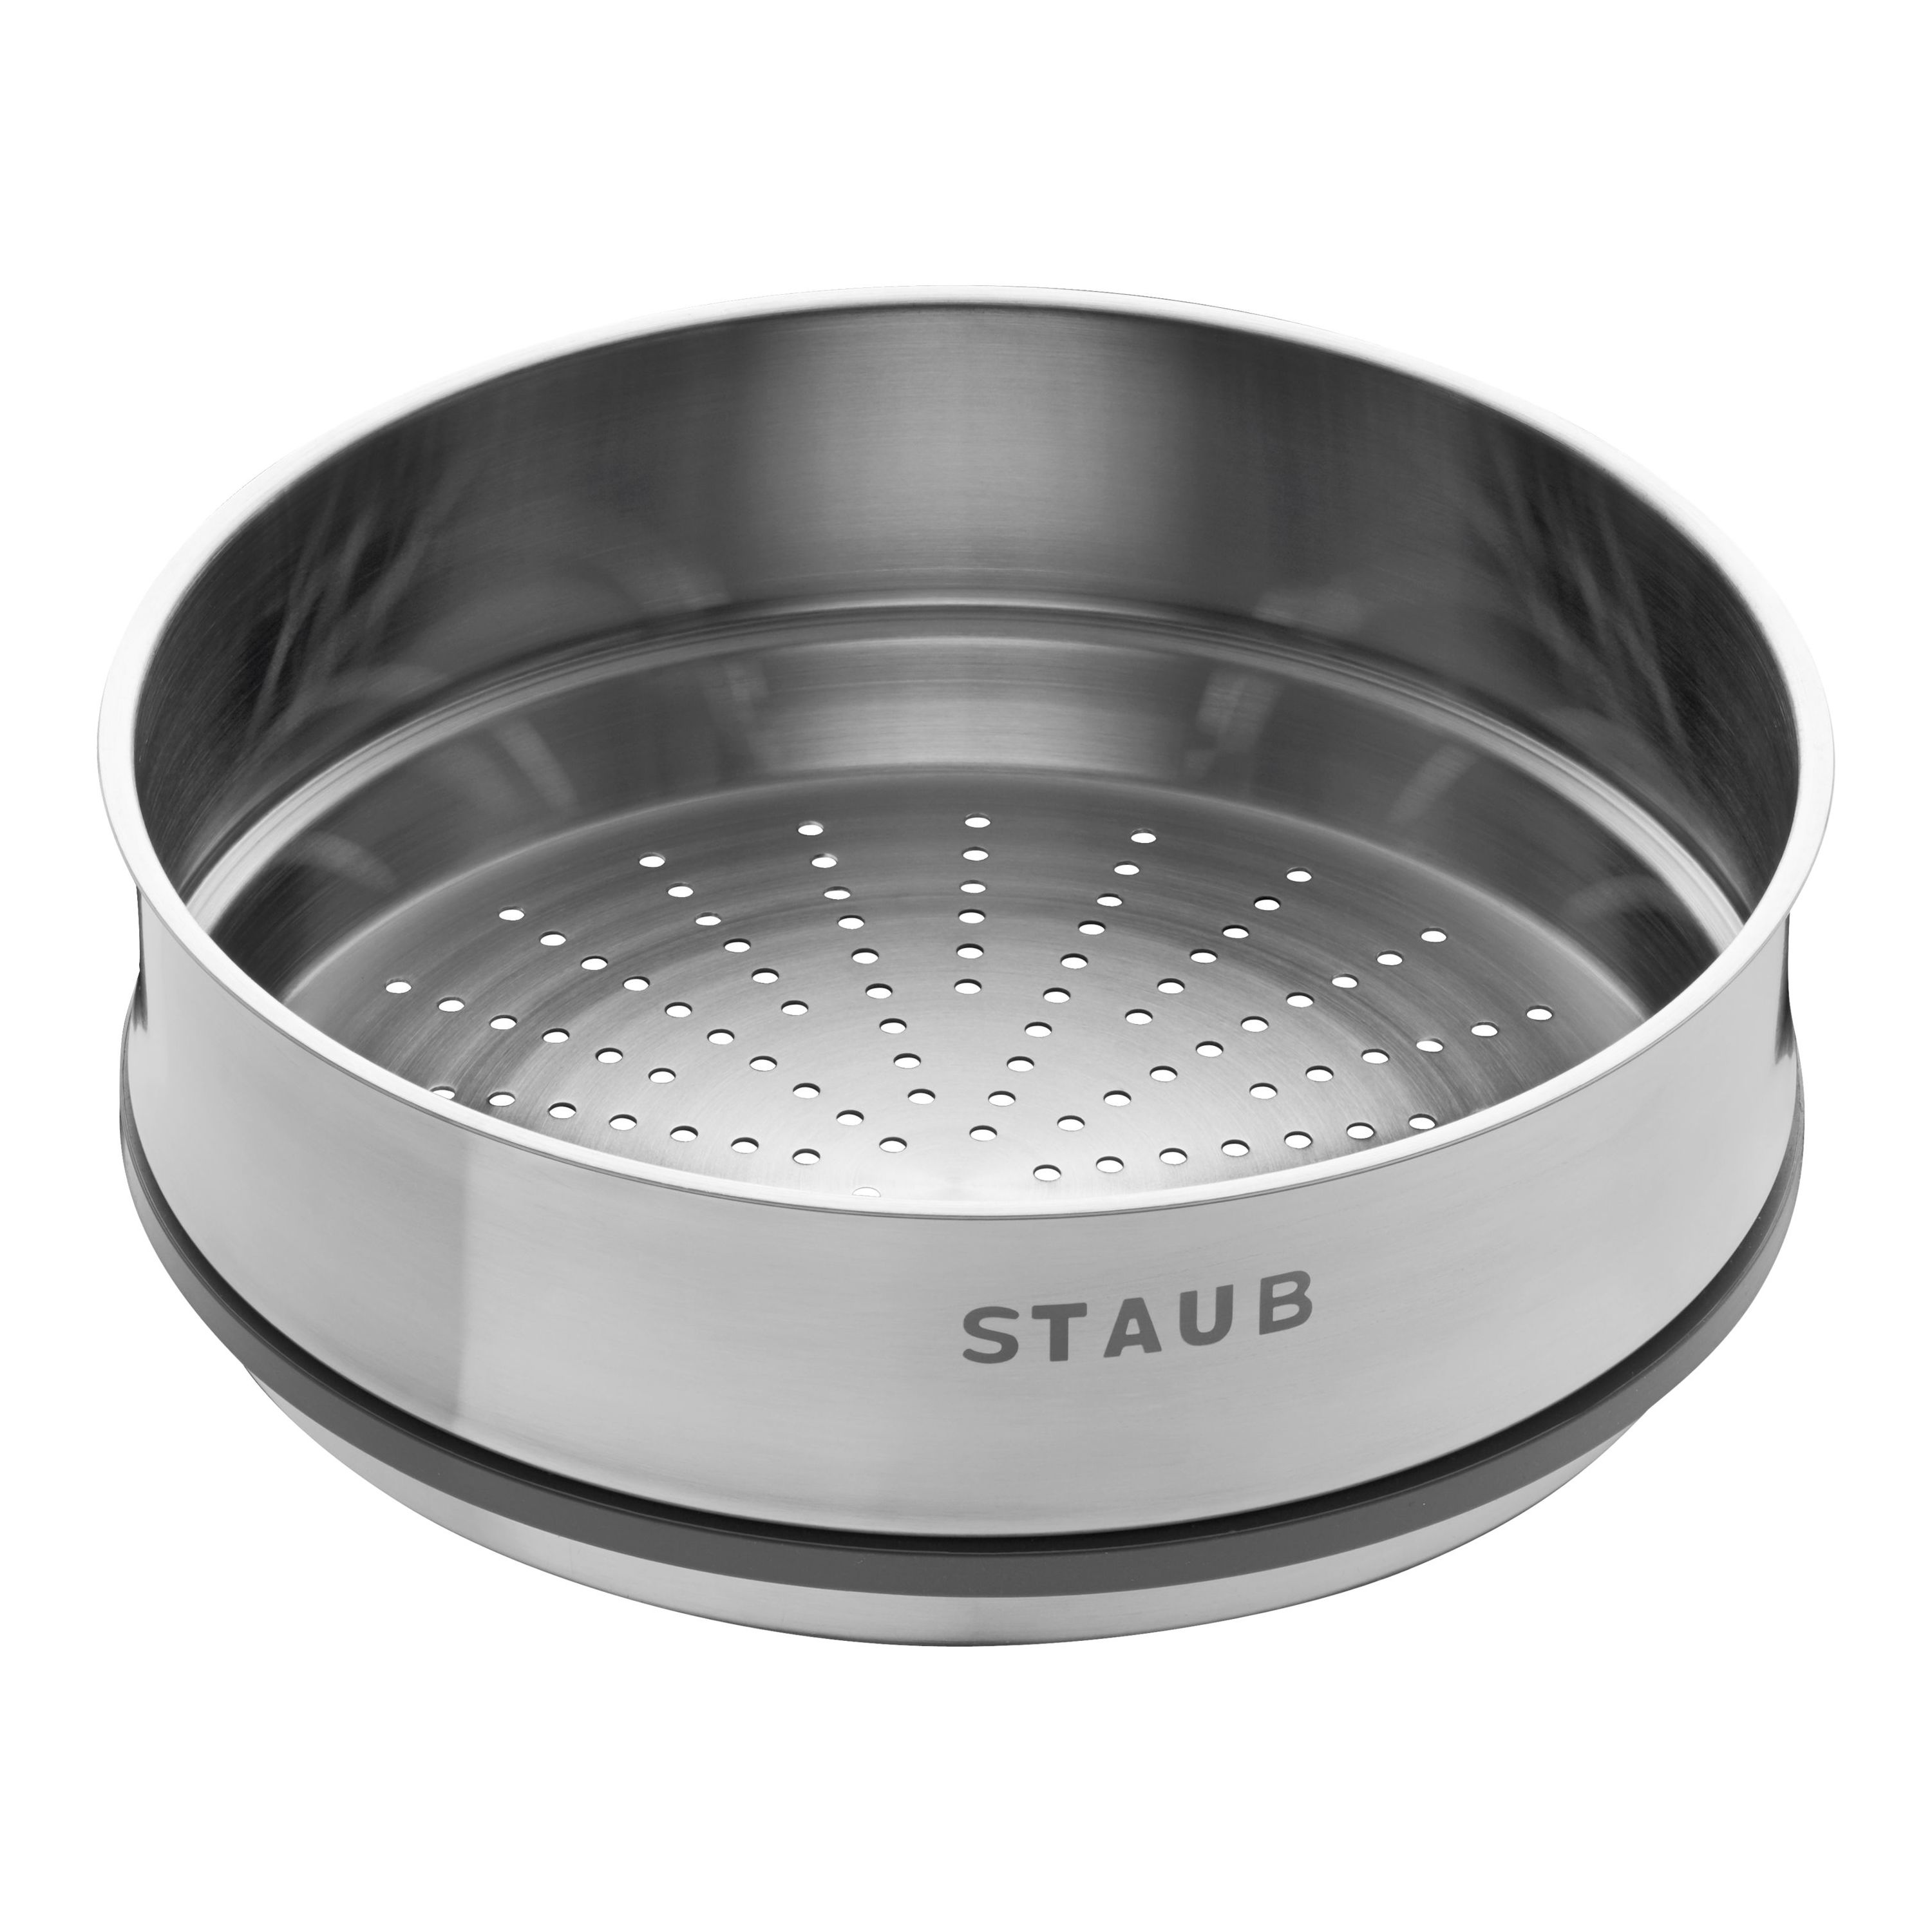 How To Use A Steamer Insert